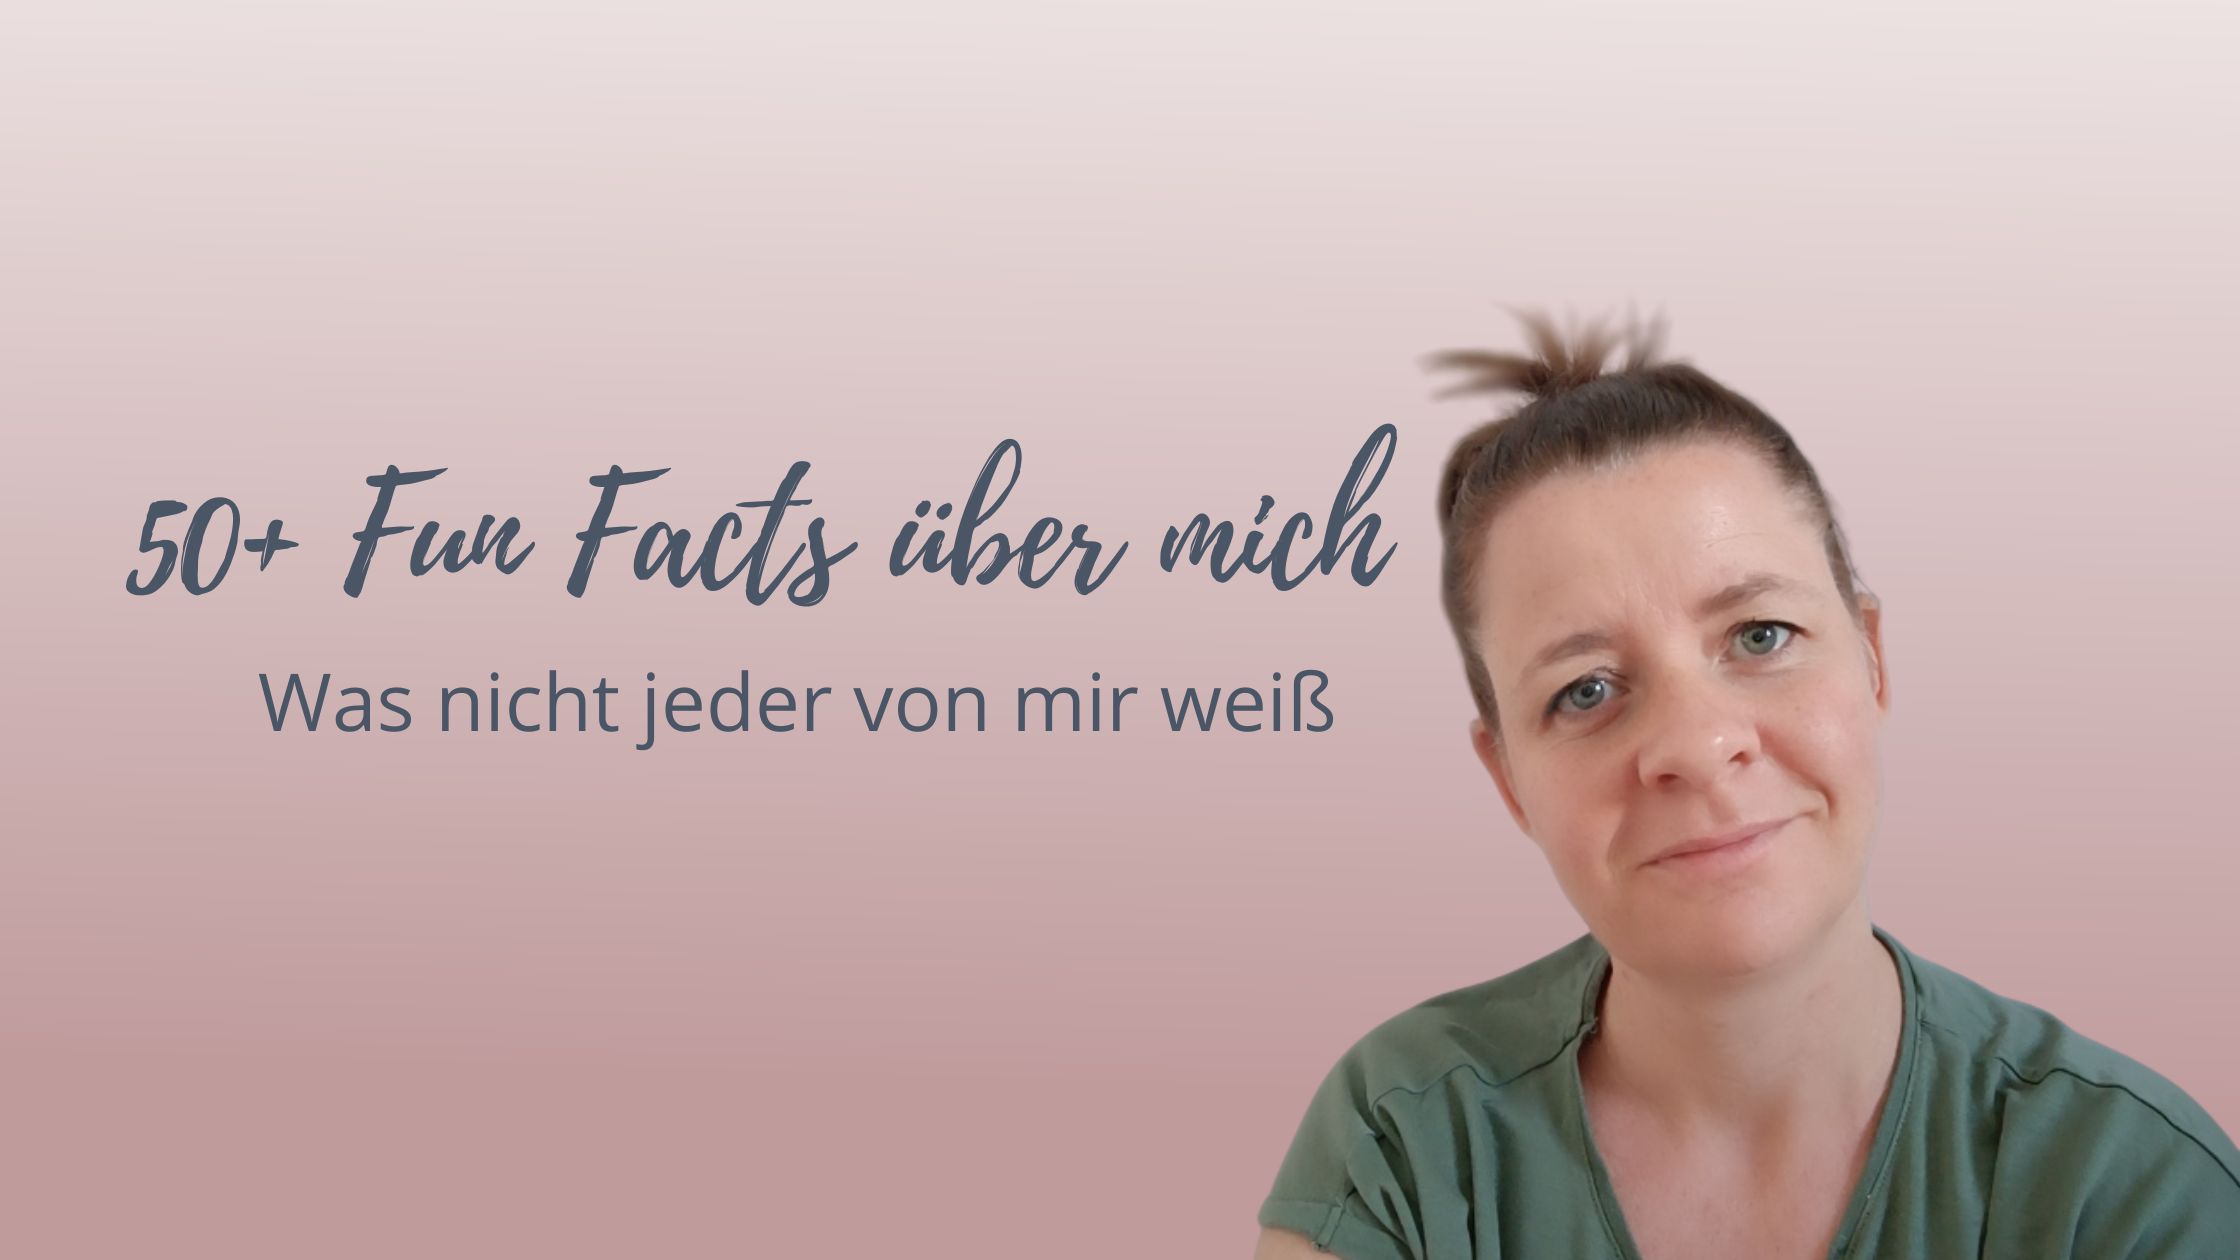 Read more about the article Fun Facts über mich